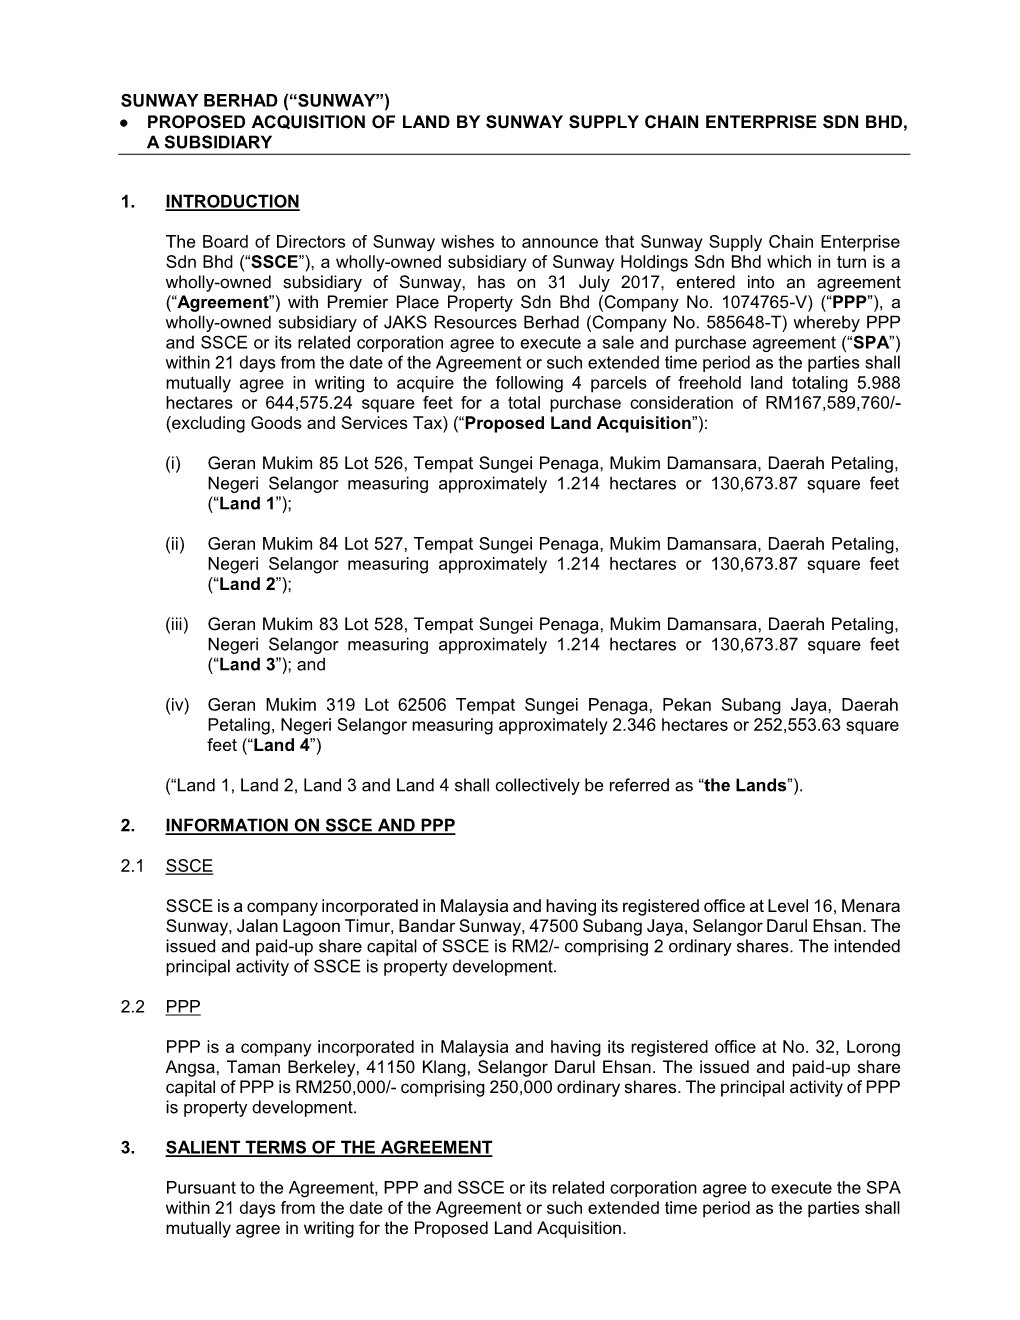 Sunway Berhad (“Sunway”)  Proposed Acquisition of Land by Sunway Supply Chain Enterprise Sdn Bhd, a Subsidiary